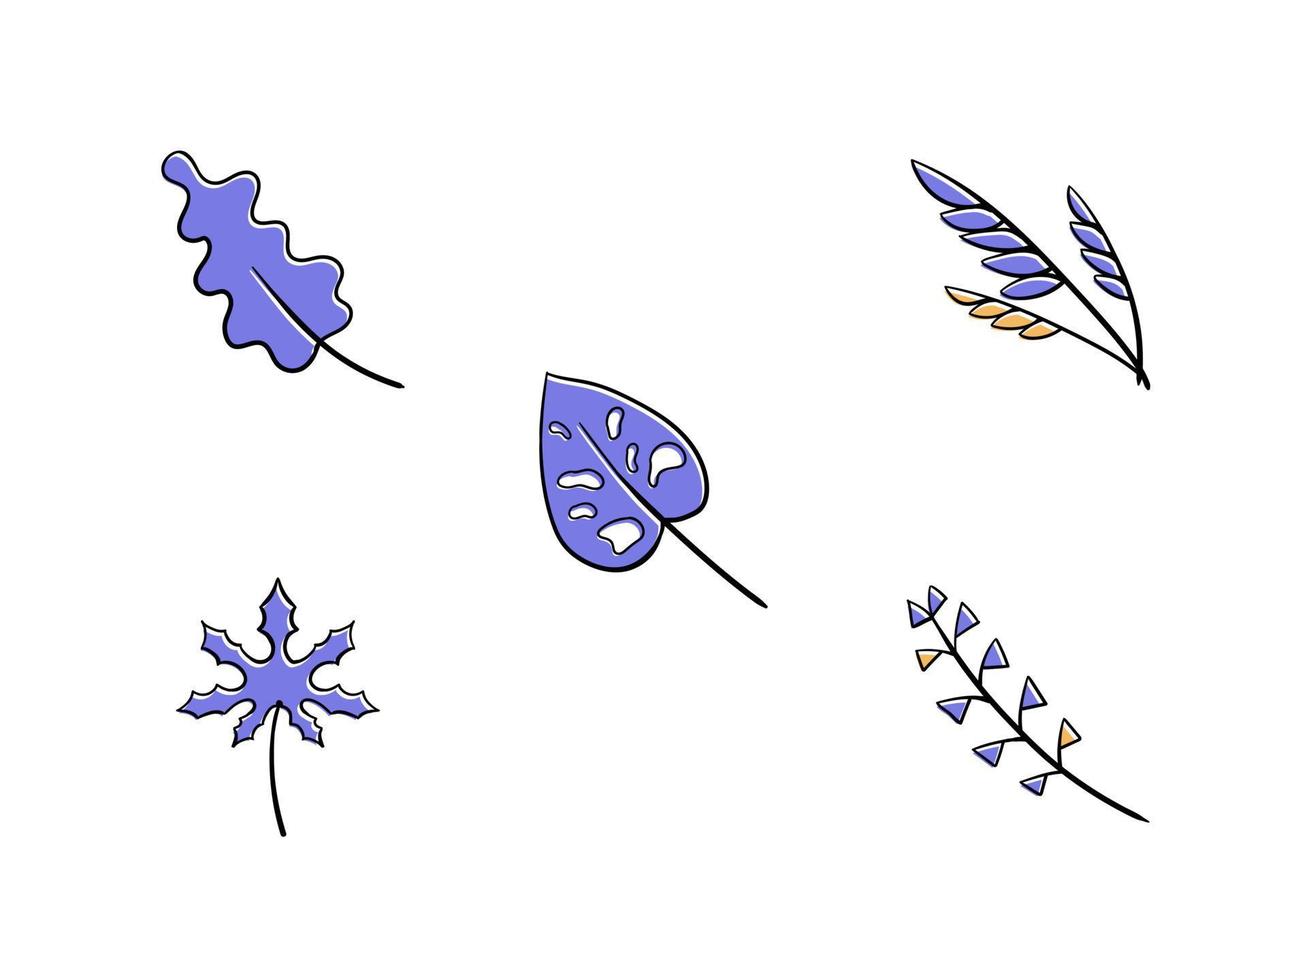 Hand Drawn Leaf Illustration Collection vector